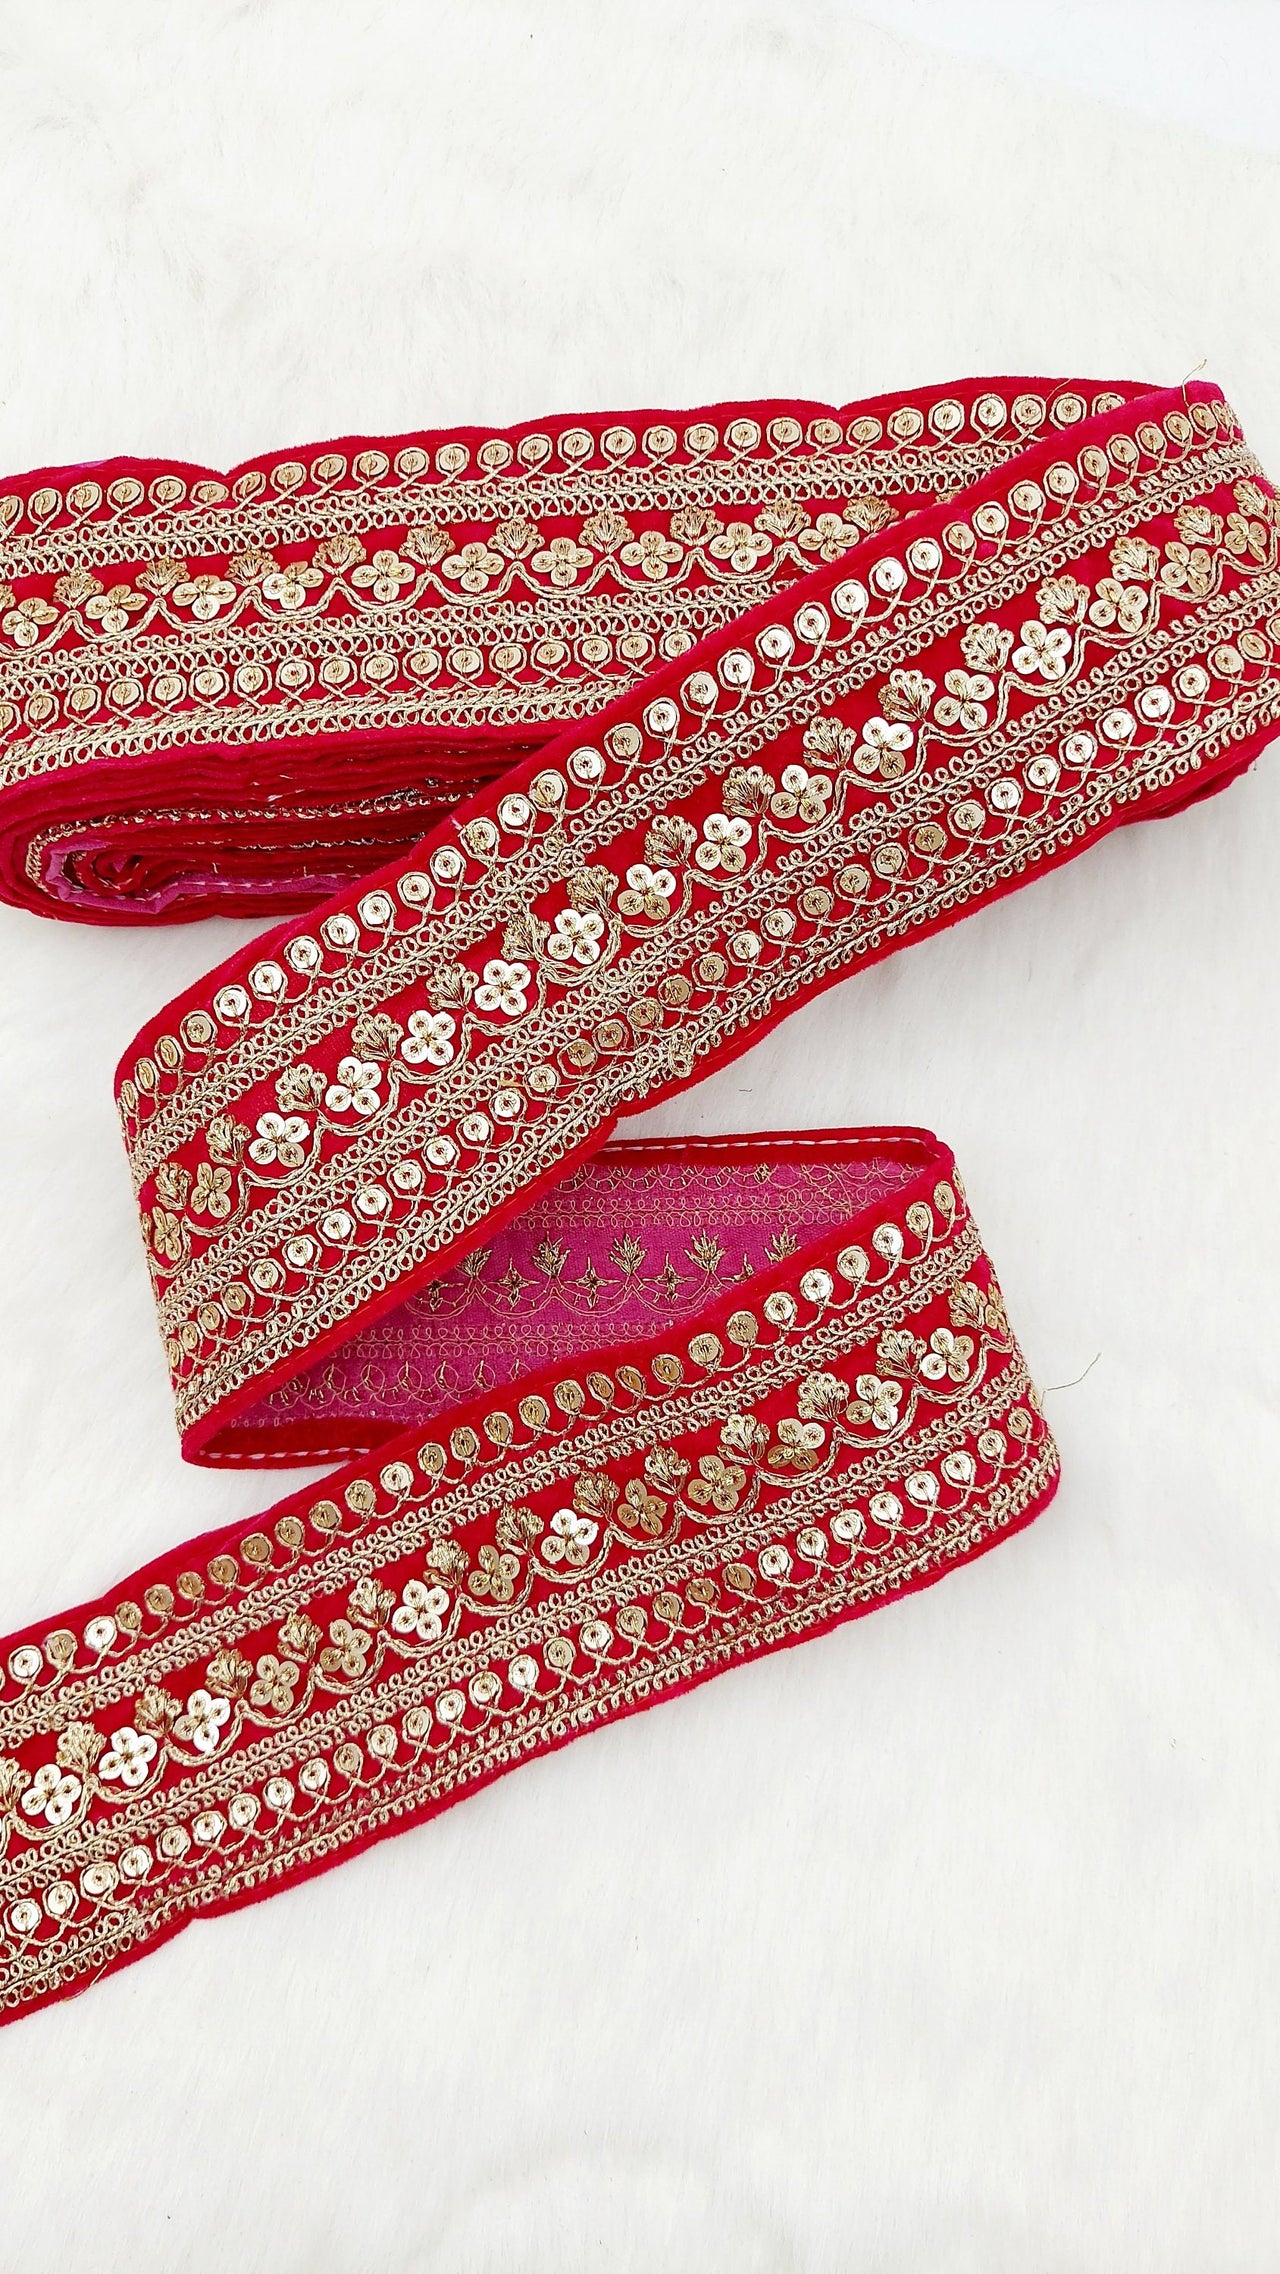 Velvet Fabric Floral Embroidered Sequins Trim Indian Sari Border, Sequin Trimming, Sequinned Lace